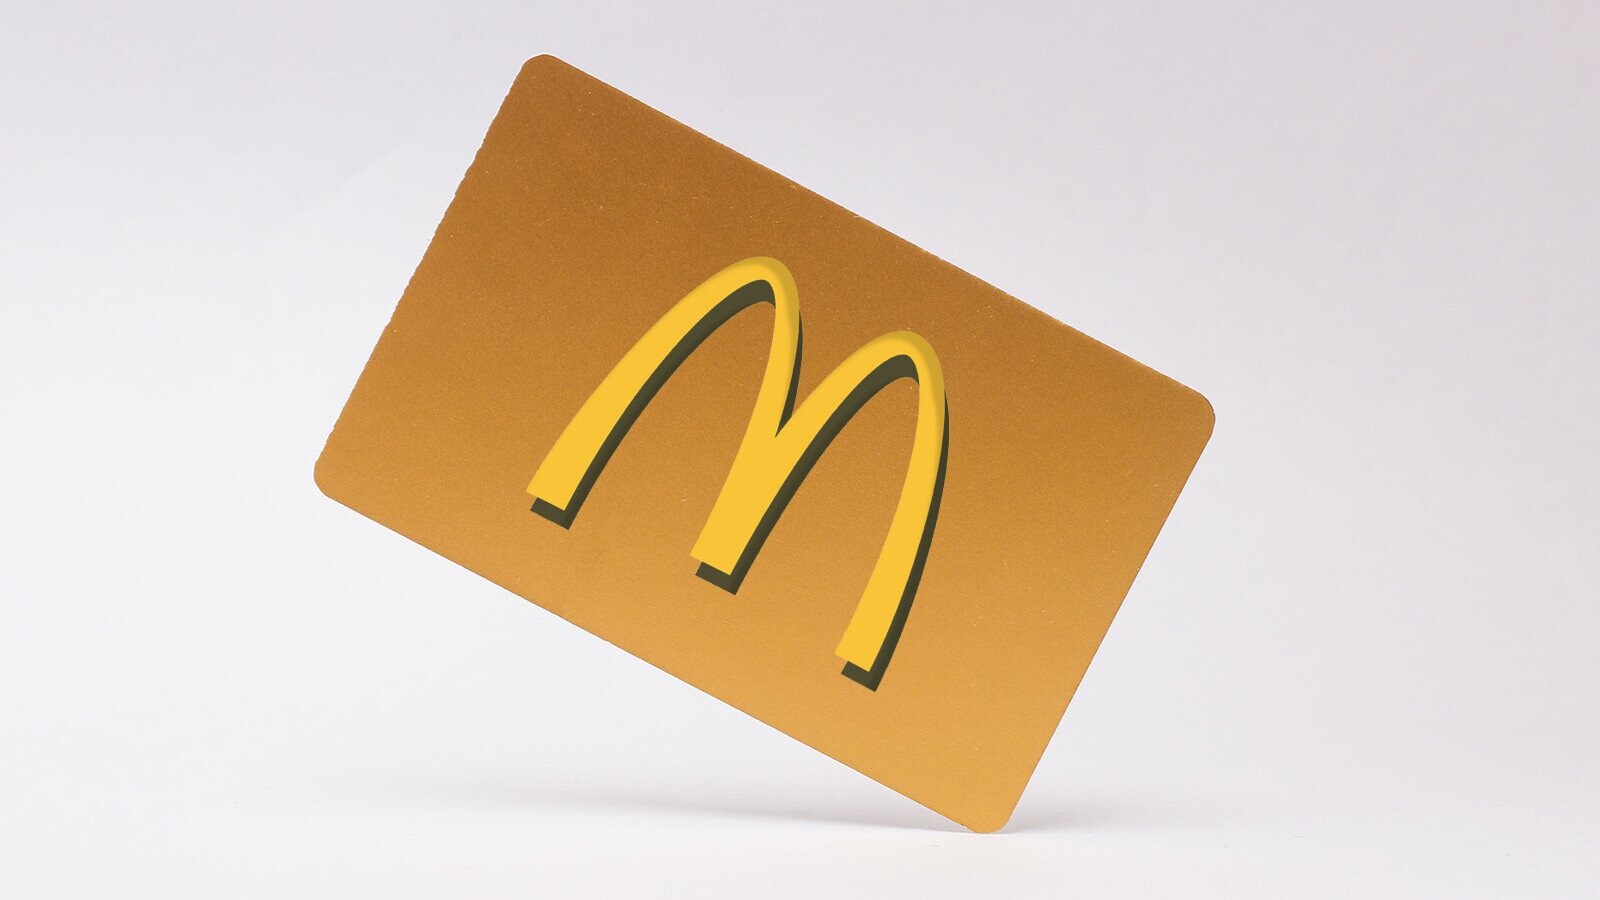 Four People Who Don’t Deserve the Golden McDonald’s Card That Gives You Free Food for Life